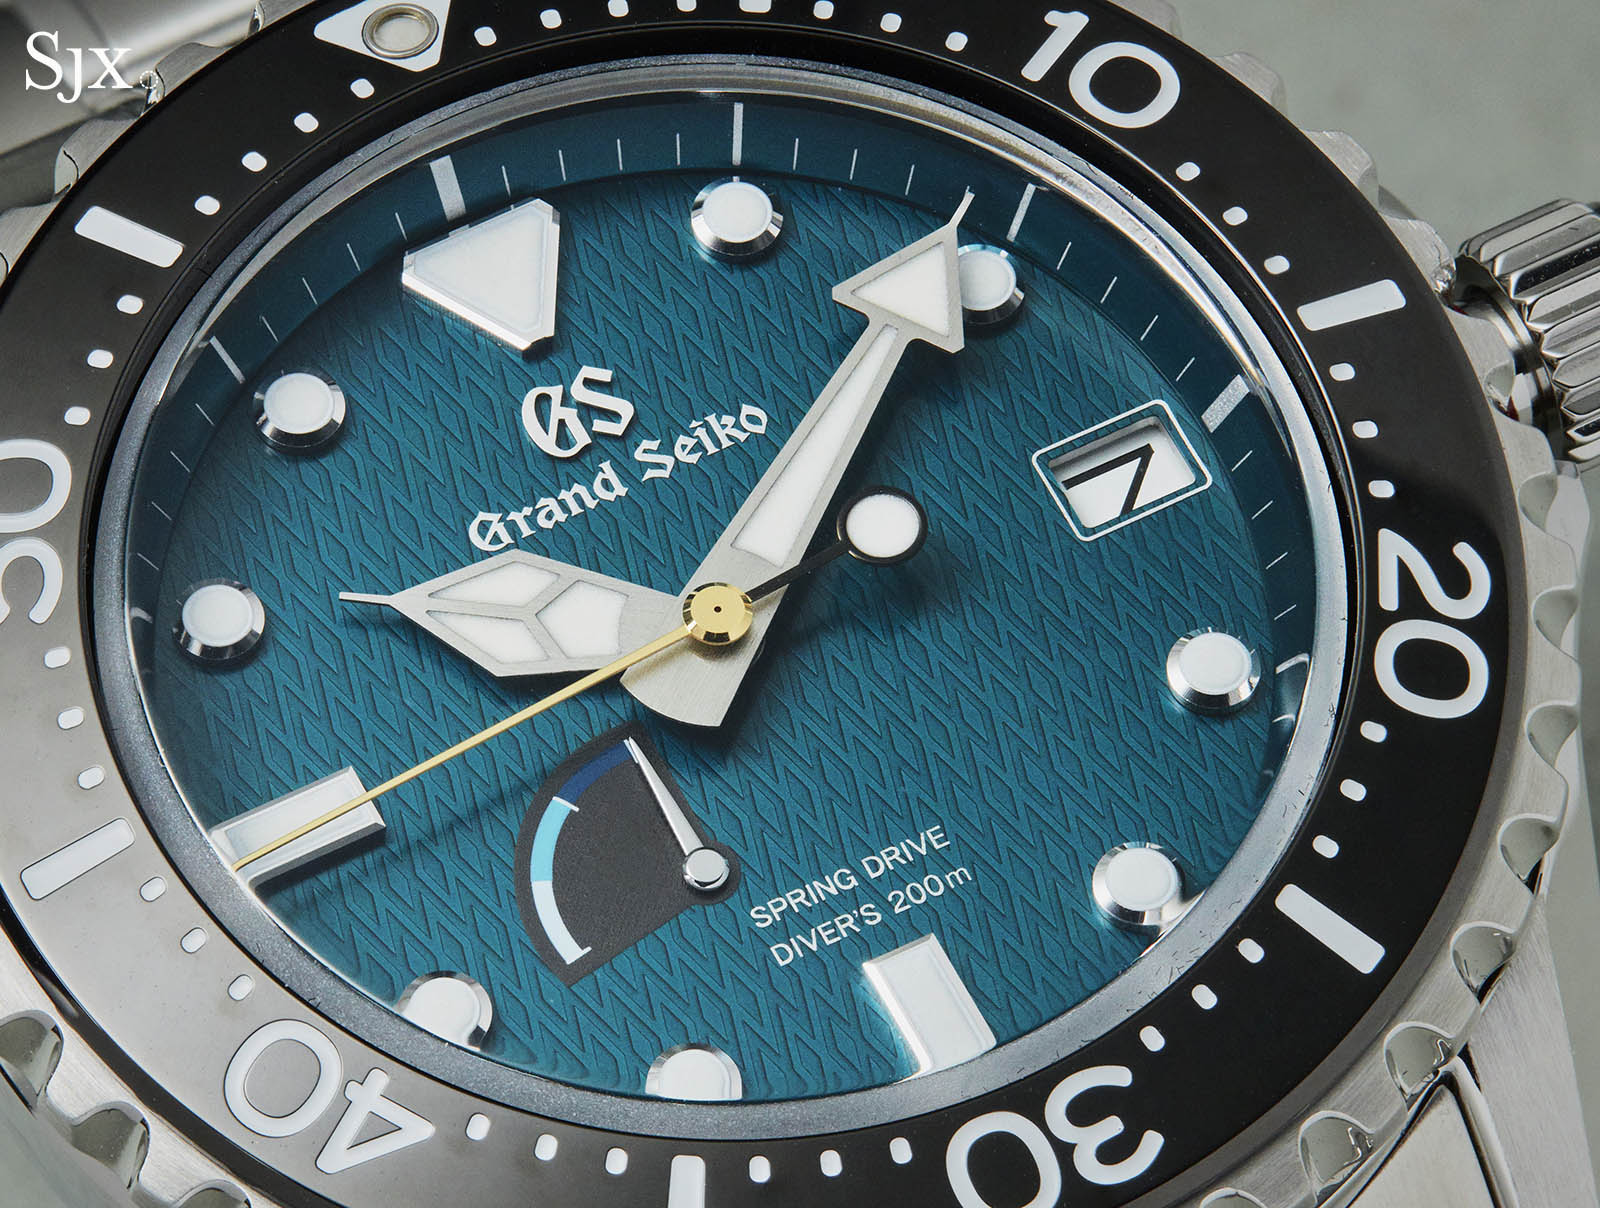 Up Close with the Grand Seiko Spring Drive Diver Asia Edition SBGA391G |  SJX Watches